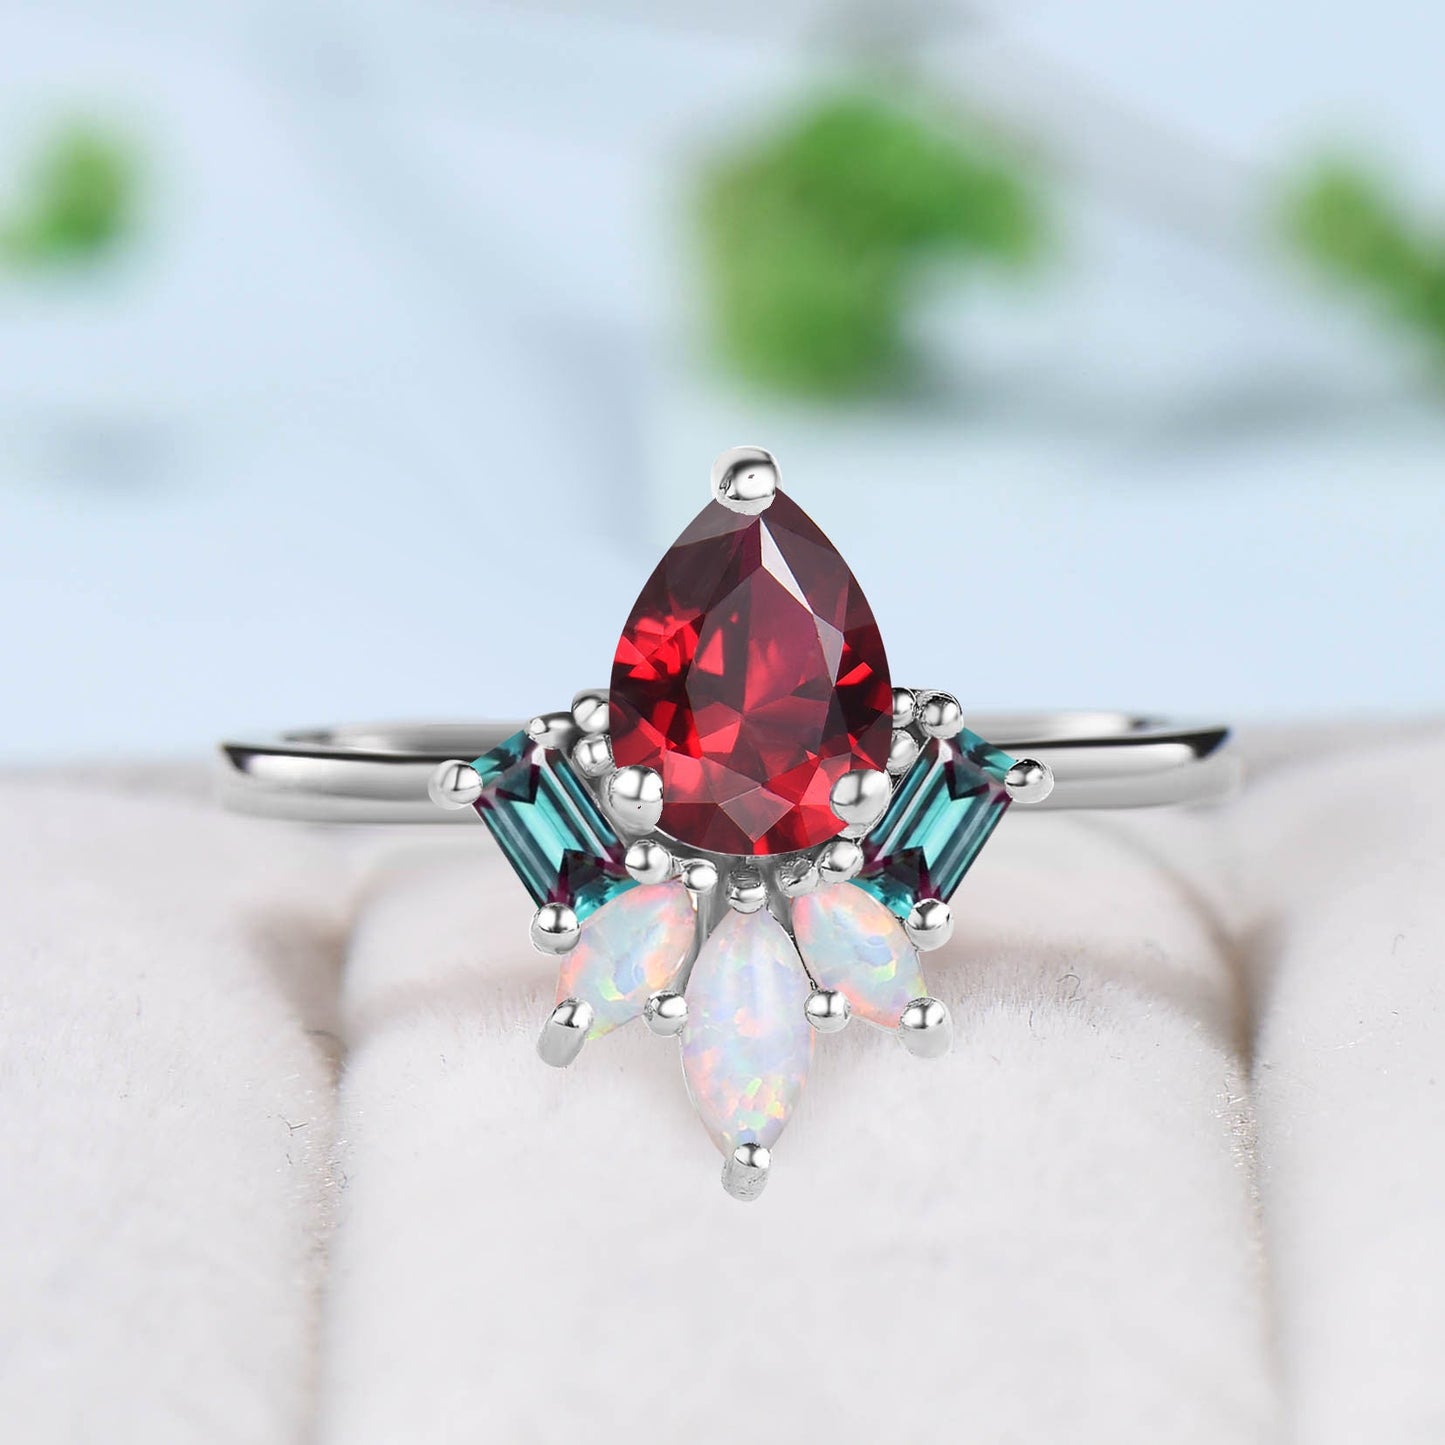 Vintage Pear Shaped Red Ruby Engagement Ring Solid 14k Rose Gold Lab Ruby Cluster Baguette Alexandrite Marquise Opal Wedding Ring For Women - PENFINE